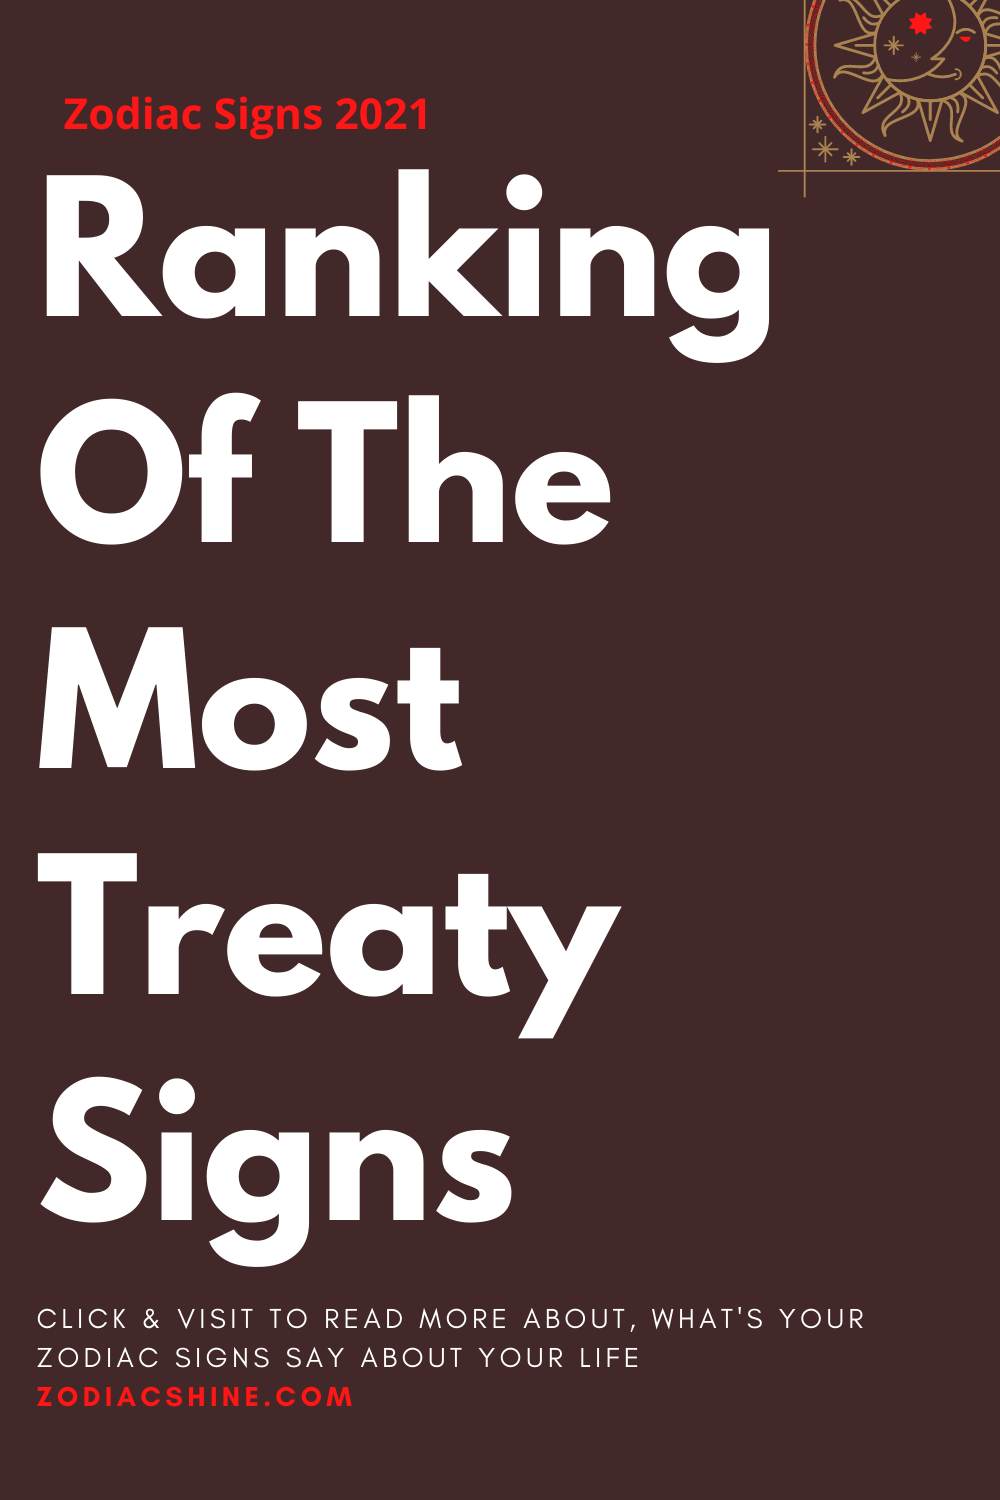 Ranking Of The Most Treaty Signs